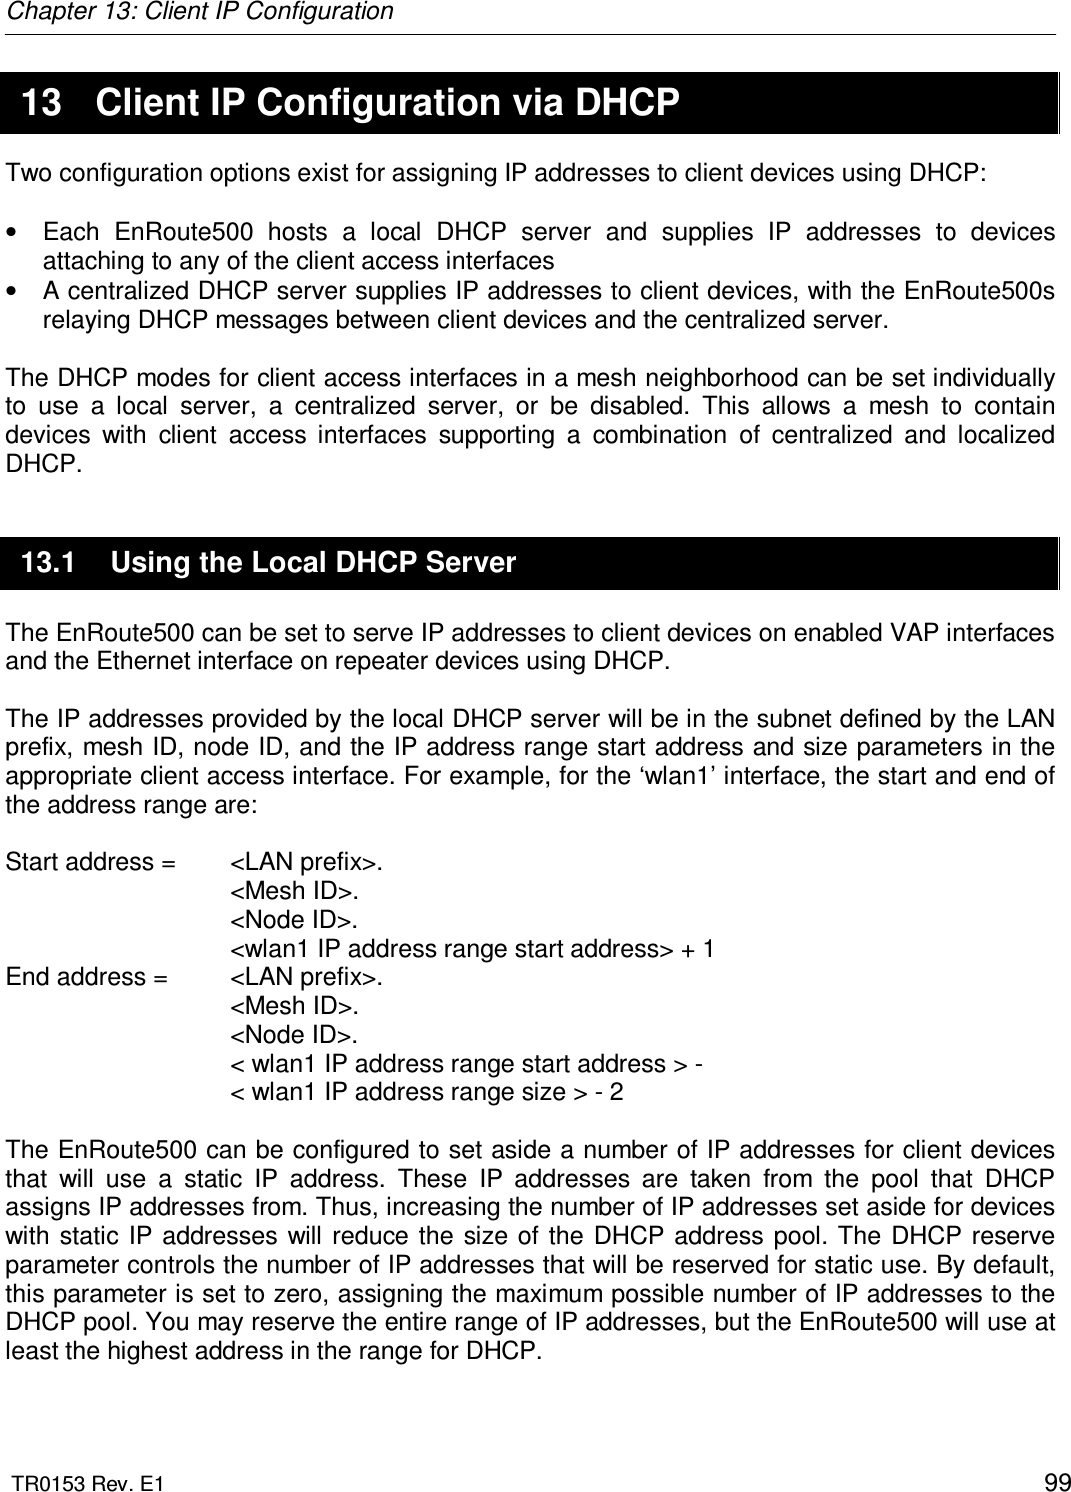 Chapter 13: Client IP Configuration  TR0153 Rev. E1    99 13  Client IP Configuration via DHCP Two configuration options exist for assigning IP addresses to client devices using DHCP:  •  Each  EnRoute500  hosts  a  local  DHCP  server  and  supplies  IP  addresses  to  devices attaching to any of the client access interfaces  •  A centralized DHCP server supplies IP addresses to client devices, with the EnRoute500s relaying DHCP messages between client devices and the centralized server.  The DHCP modes for client access interfaces in a mesh neighborhood can be set individually to  use  a  local  server,  a  centralized  server,  or  be  disabled.  This  allows  a  mesh  to  contain devices  with  client  access  interfaces  supporting  a  combination  of  centralized  and  localized DHCP. 13.1  Using the Local DHCP Server The EnRoute500 can be set to serve IP addresses to client devices on enabled VAP interfaces and the Ethernet interface on repeater devices using DHCP.   The IP addresses provided by the local DHCP server will be in the subnet defined by the LAN prefix, mesh ID, node ID, and the IP address range start address and size parameters in the appropriate client access interface. For example, for the ‘wlan1’ interface, the start and end of the address range are:  Start address =   &lt;LAN prefix&gt;. &lt;Mesh ID&gt;. &lt;Node ID&gt;. &lt;wlan1 IP address range start address&gt; + 1 End address =   &lt;LAN prefix&gt;. &lt;Mesh ID&gt;. &lt;Node ID&gt;. &lt; wlan1 IP address range start address &gt; -  &lt; wlan1 IP address range size &gt; - 2  The EnRoute500 can be configured to set aside a number of IP addresses for client devices that  will  use  a  static  IP  address.  These  IP  addresses  are  taken  from  the  pool  that  DHCP assigns IP addresses from. Thus, increasing the number of IP addresses set aside for devices with static IP  addresses will  reduce  the size of  the DHCP address pool. The  DHCP reserve parameter controls the number of IP addresses that will be reserved for static use. By default, this parameter is set to zero, assigning the maximum possible number of IP addresses to the DHCP pool. You may reserve the entire range of IP addresses, but the EnRoute500 will use at least the highest address in the range for DHCP.  